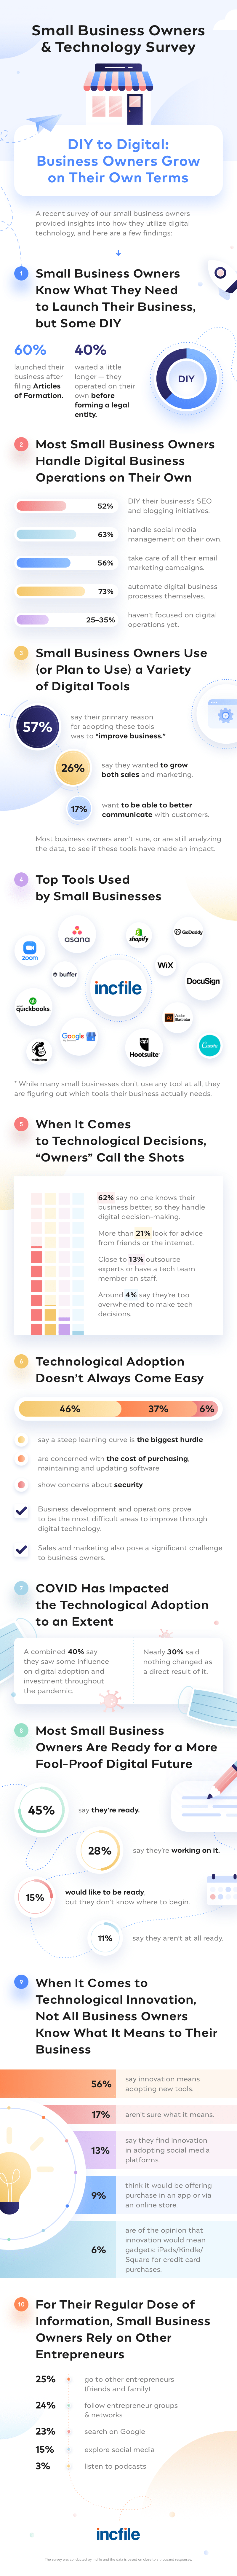 Largest Barrier to Digital Adoption Isn't Cost for 45% of Small Business